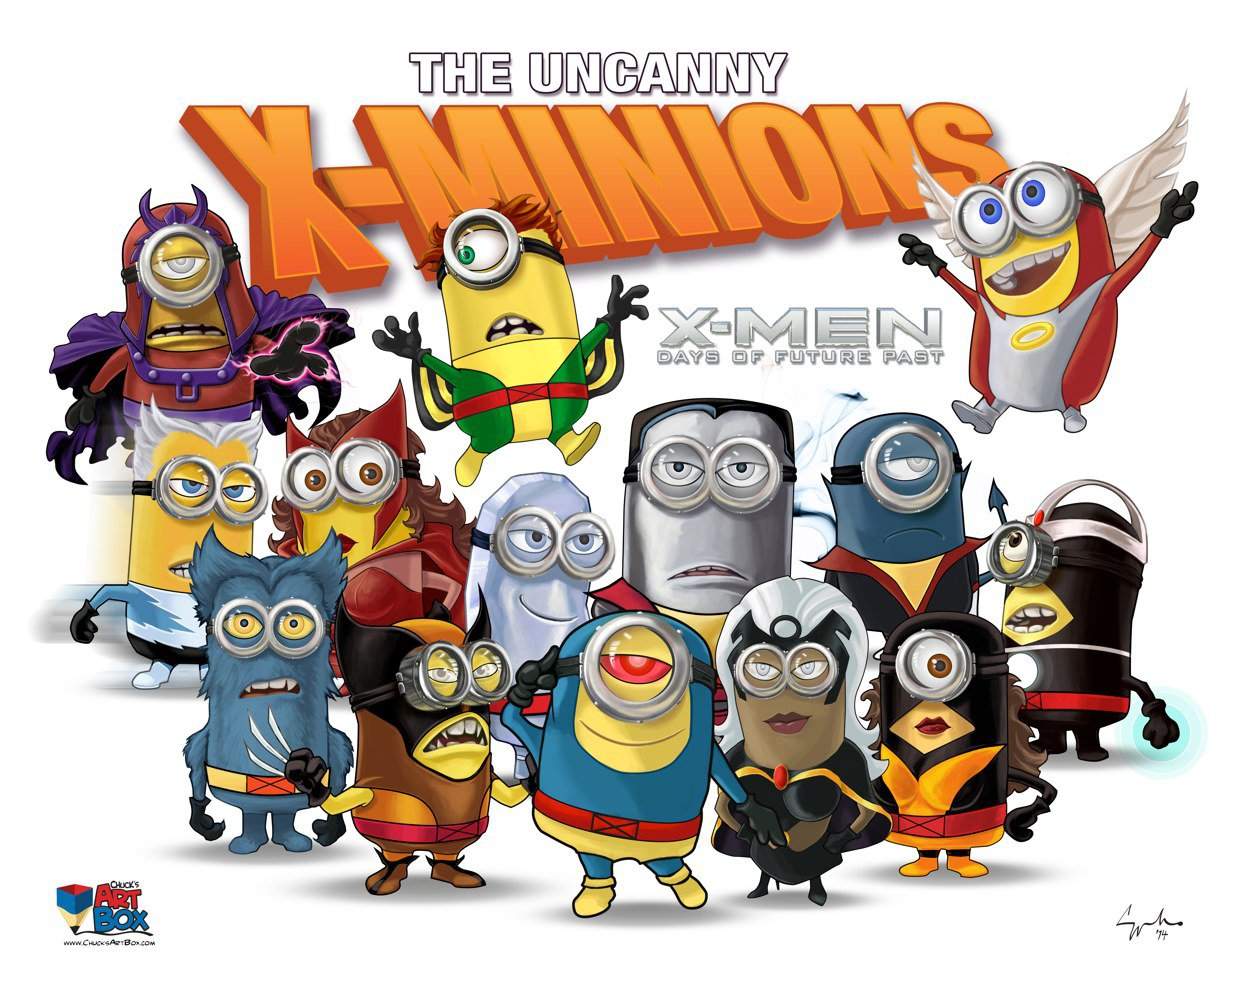 Vamers - Artistry - X-MINIONS Days of Future Past - Despicable Me Minions as X-MEN - Full Roster of Uncanny X-MEN